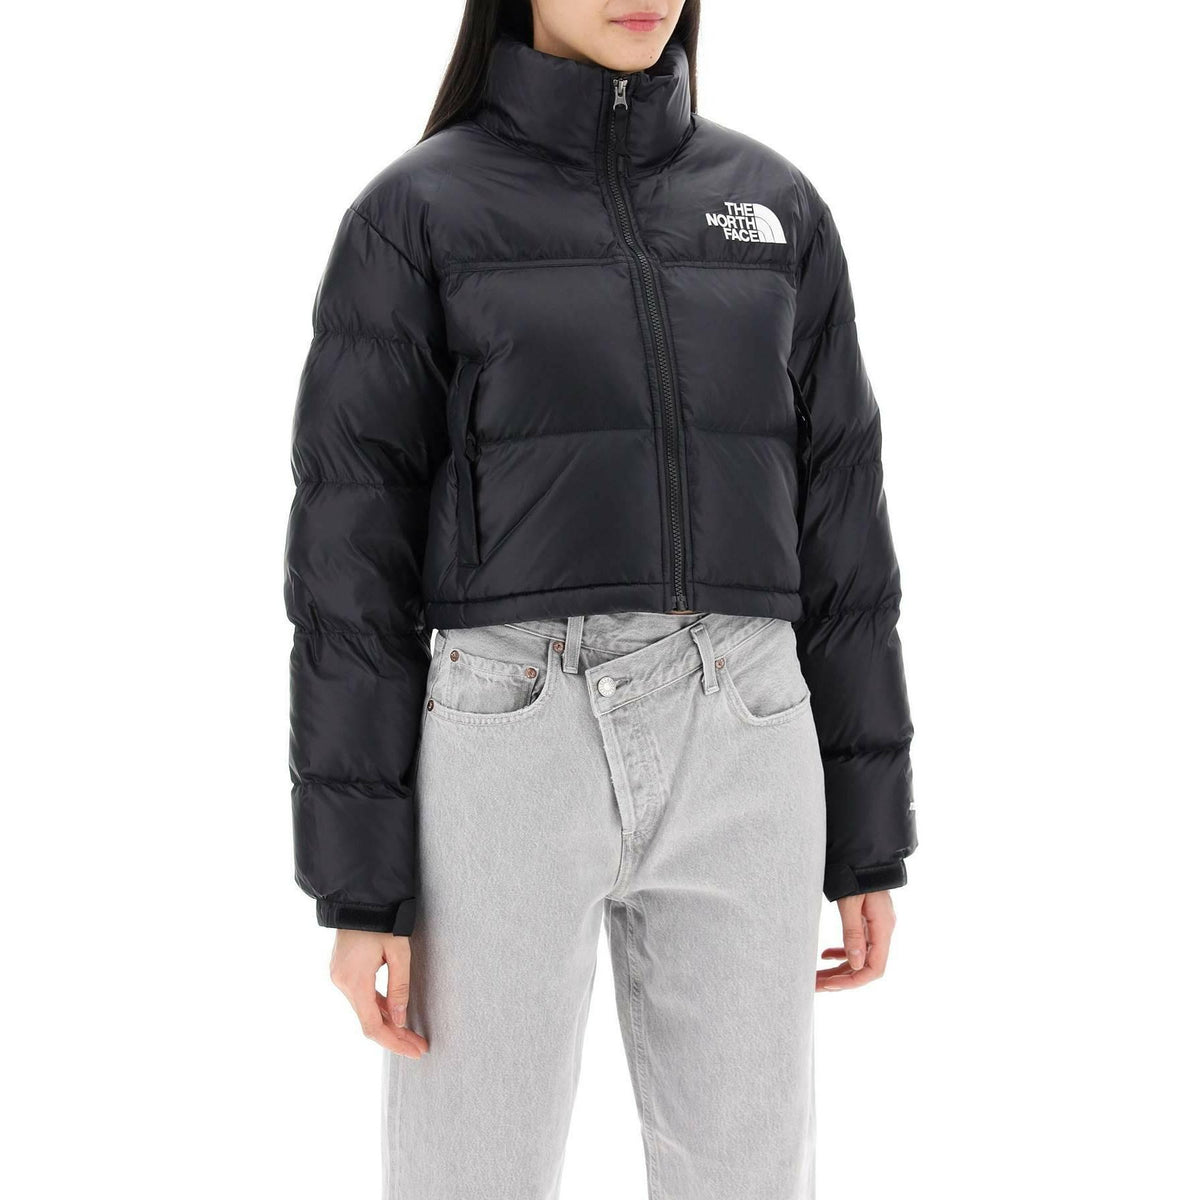 THE NORTH FACE - The North Face Black Cropped Nuptse Jacket with Recycled Down - JOHN JULIA